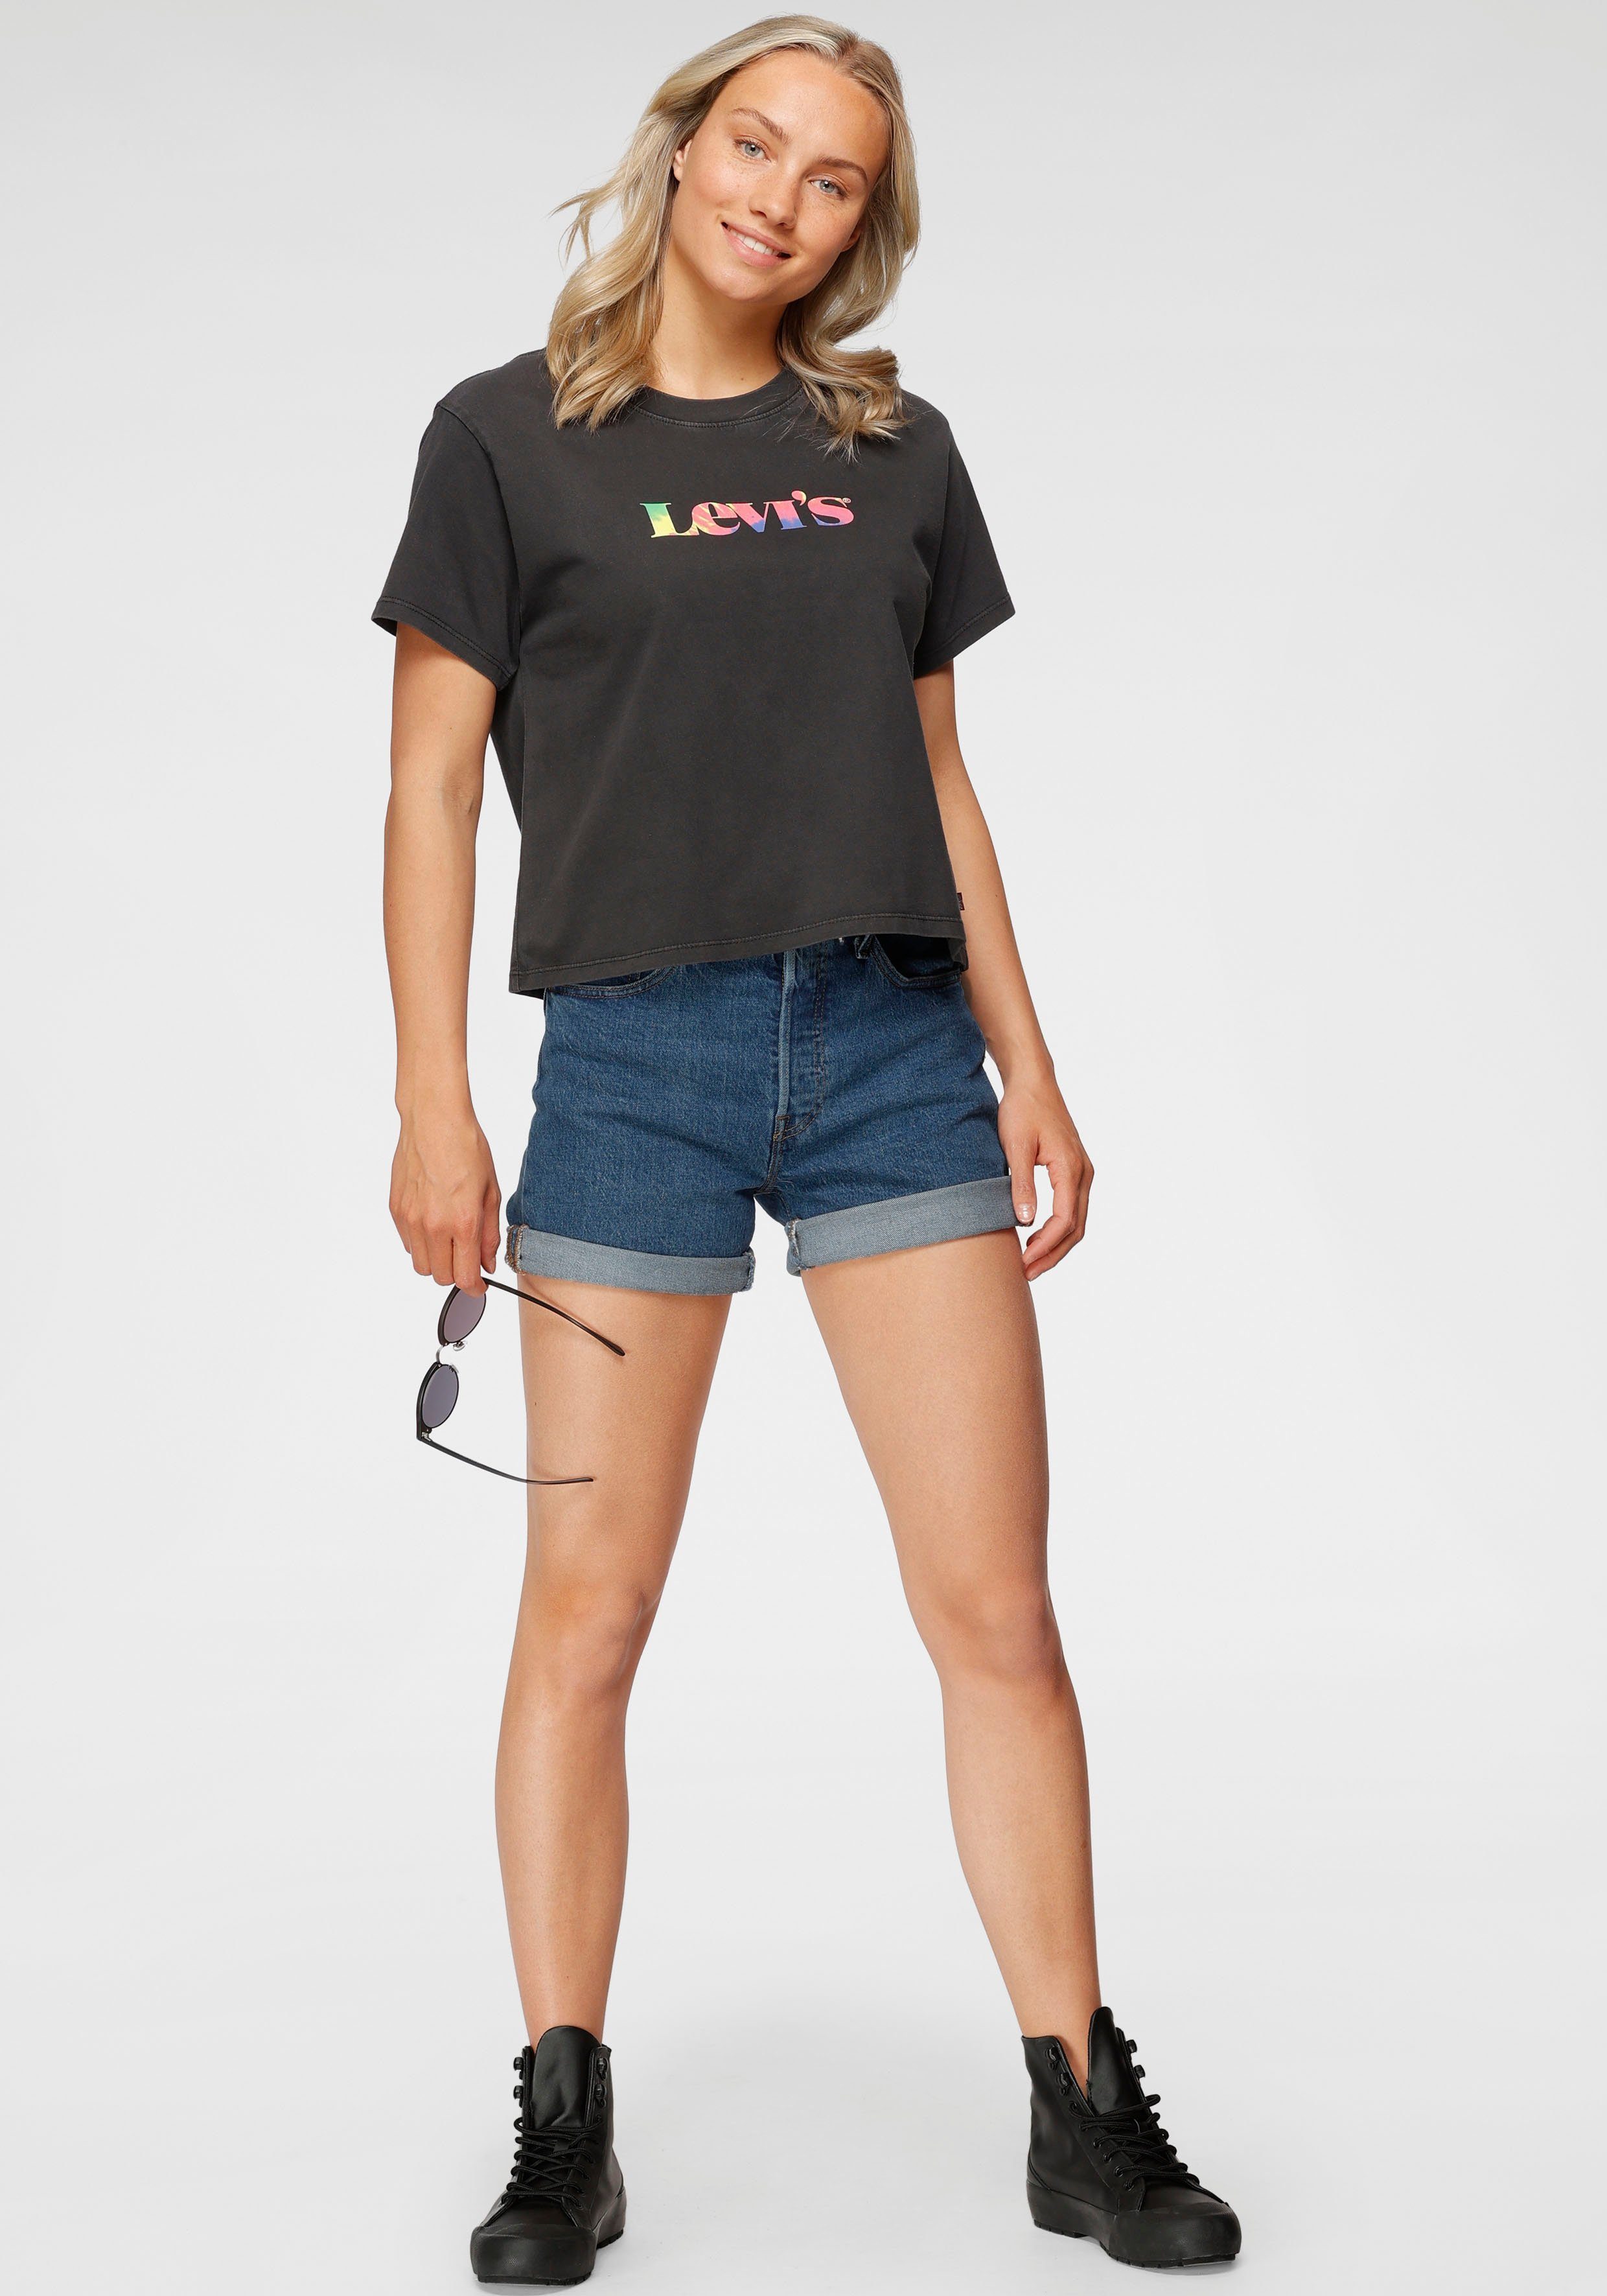 Levi's® Shorts 501 Mid Thigh Collection 501 Short